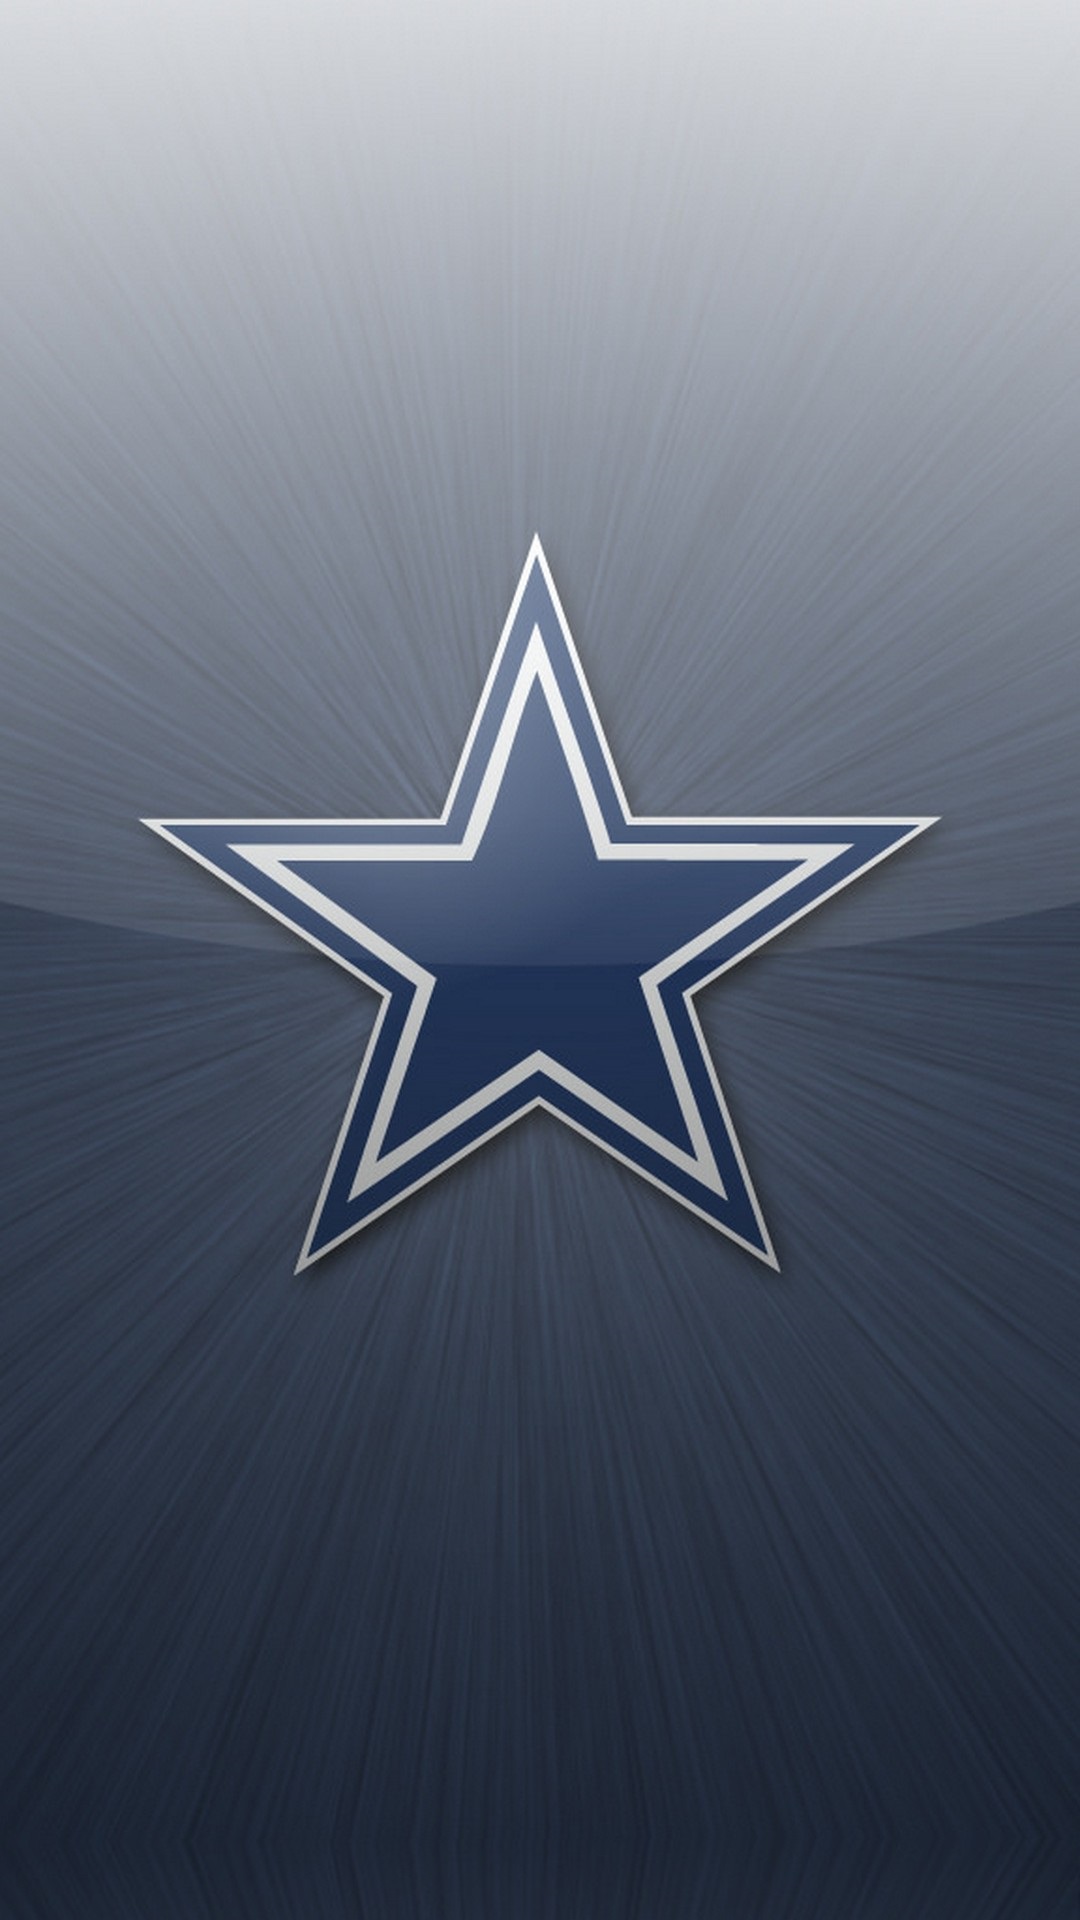 Dallas Cowboys iPhone 8 Wallpaper With high-resolution 1080X1920 pixel. Download and set as wallpaper for Apple iPhone X, XS Max, XR, 8, 7, 6, SE, iPad, Android